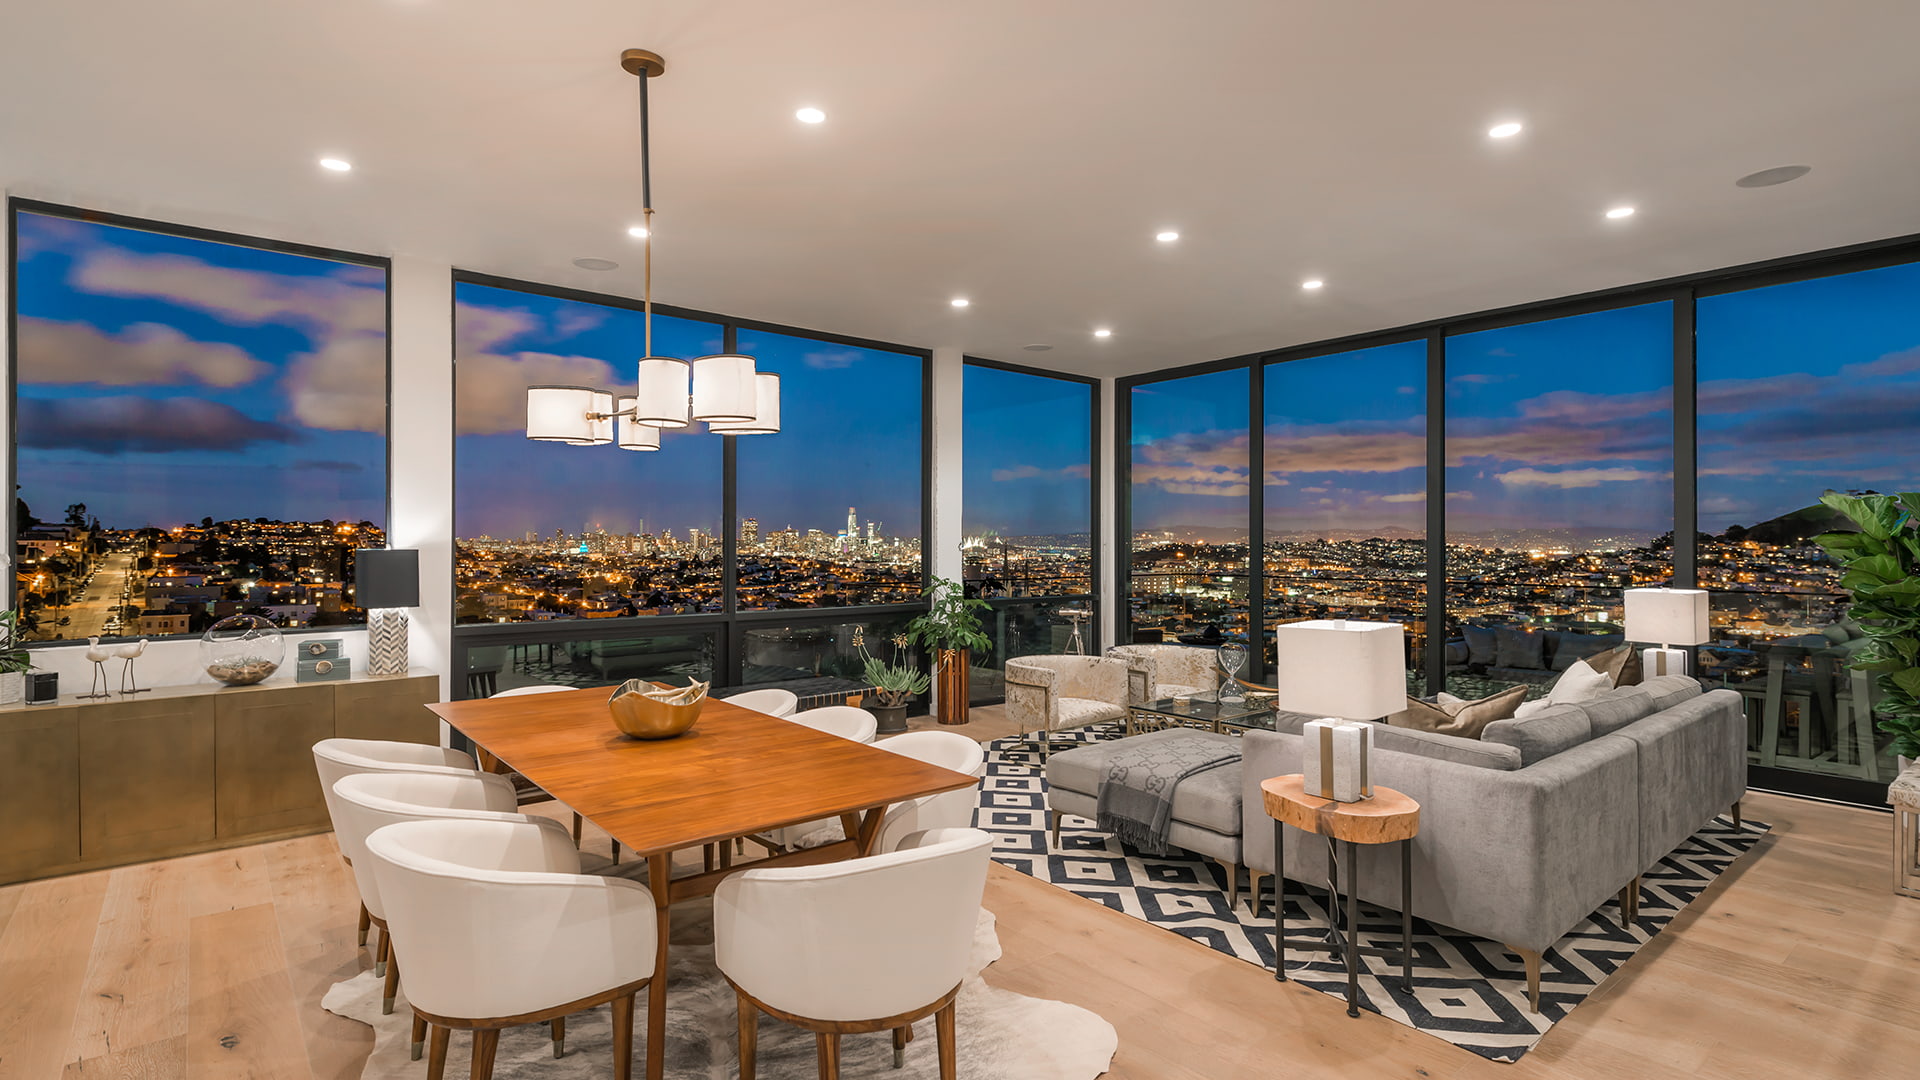 A Penthouse interior at night with the lit city skyline outside